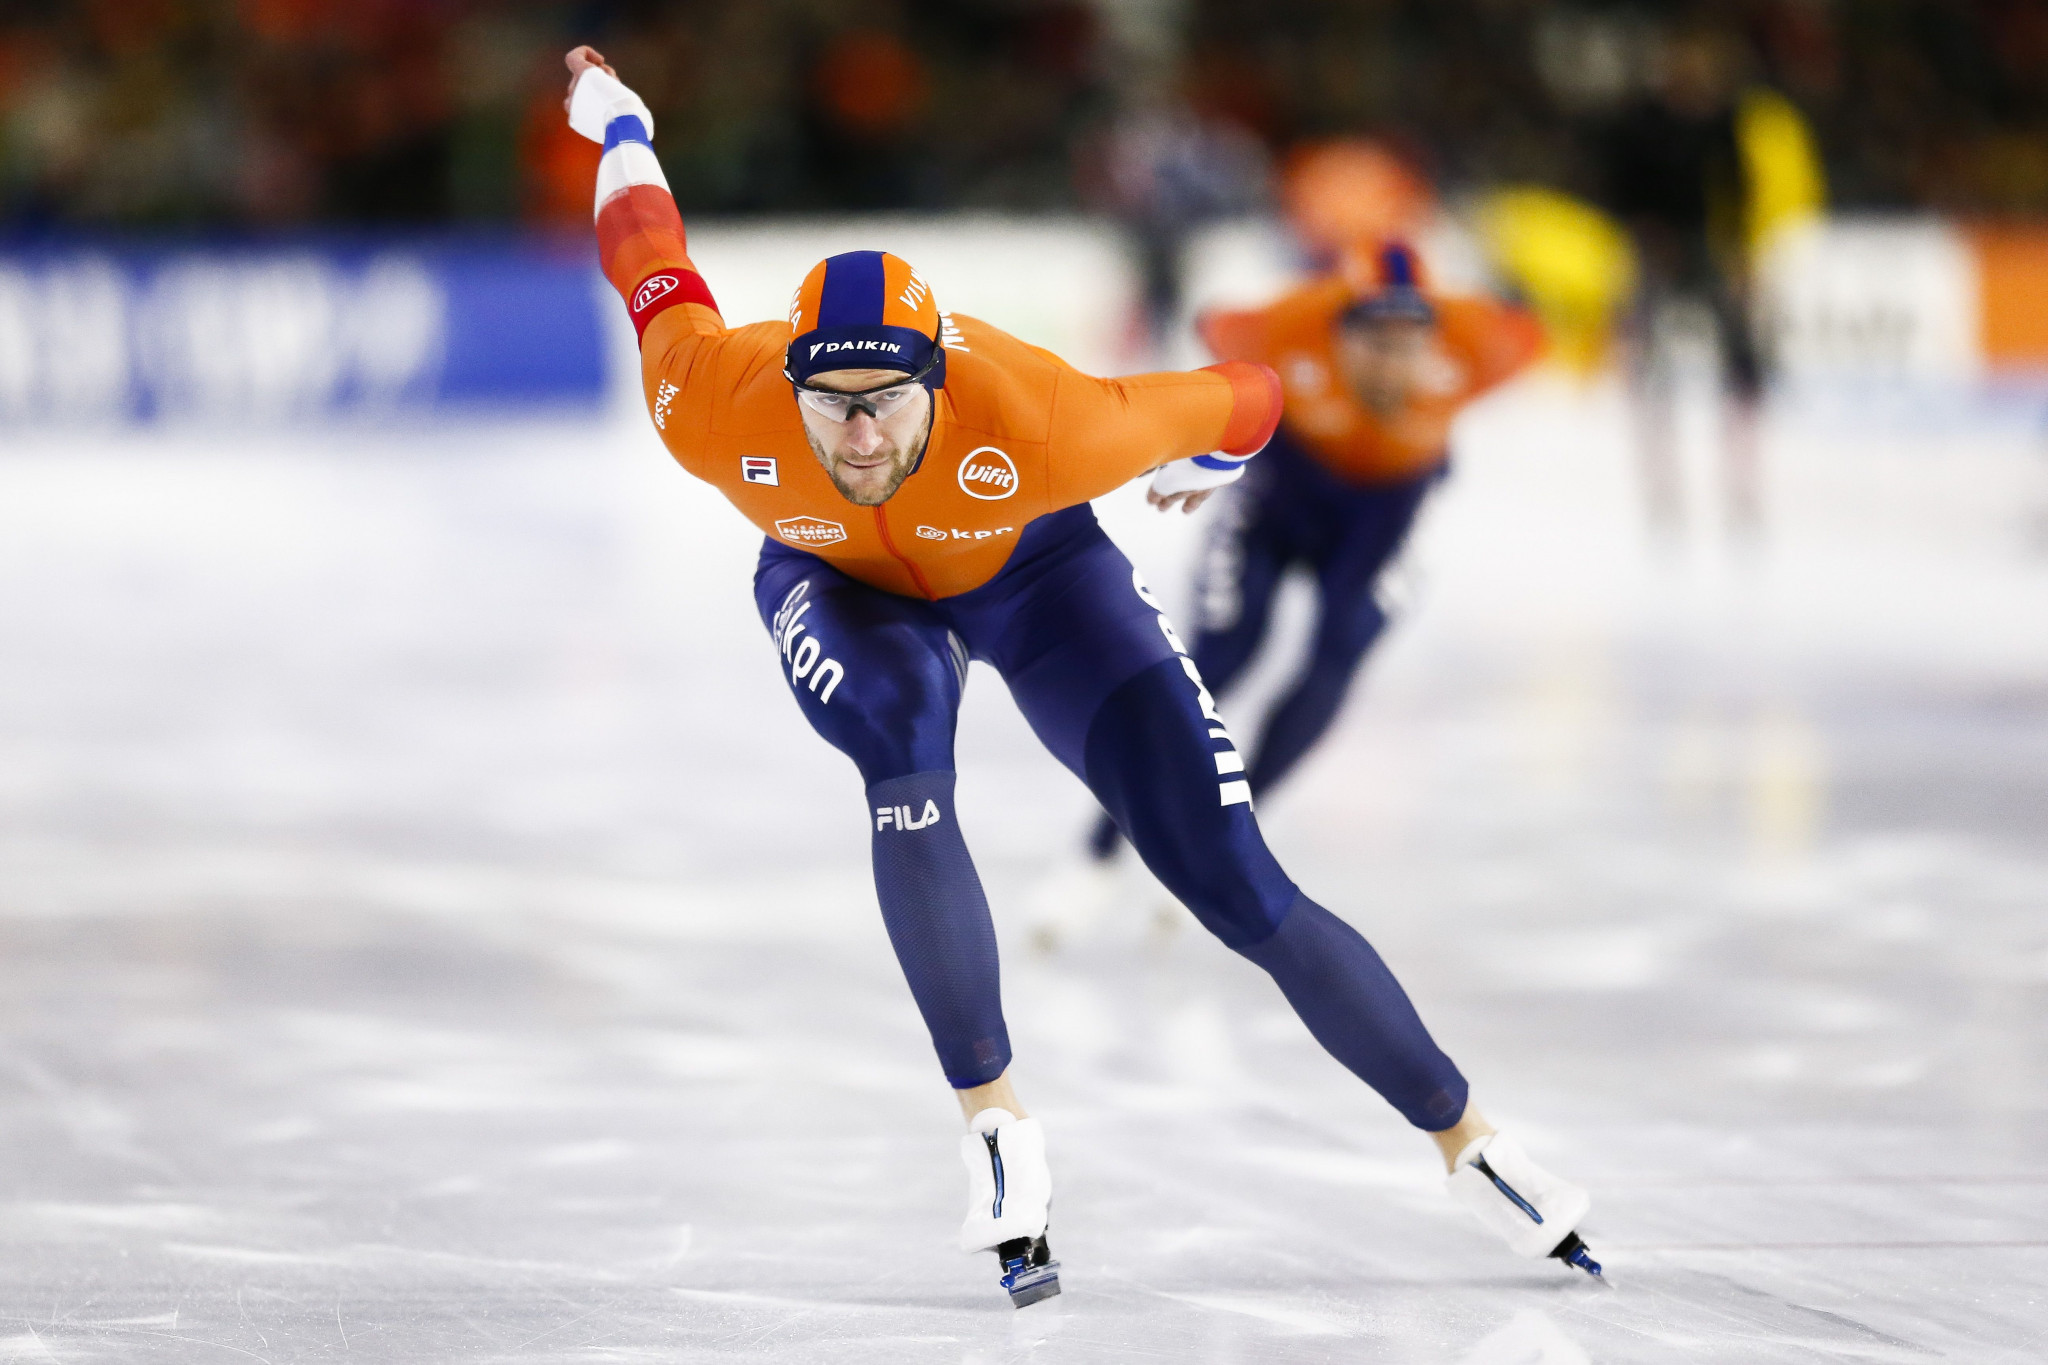 ISU establish deadlines to determine whether speed skating events can be held